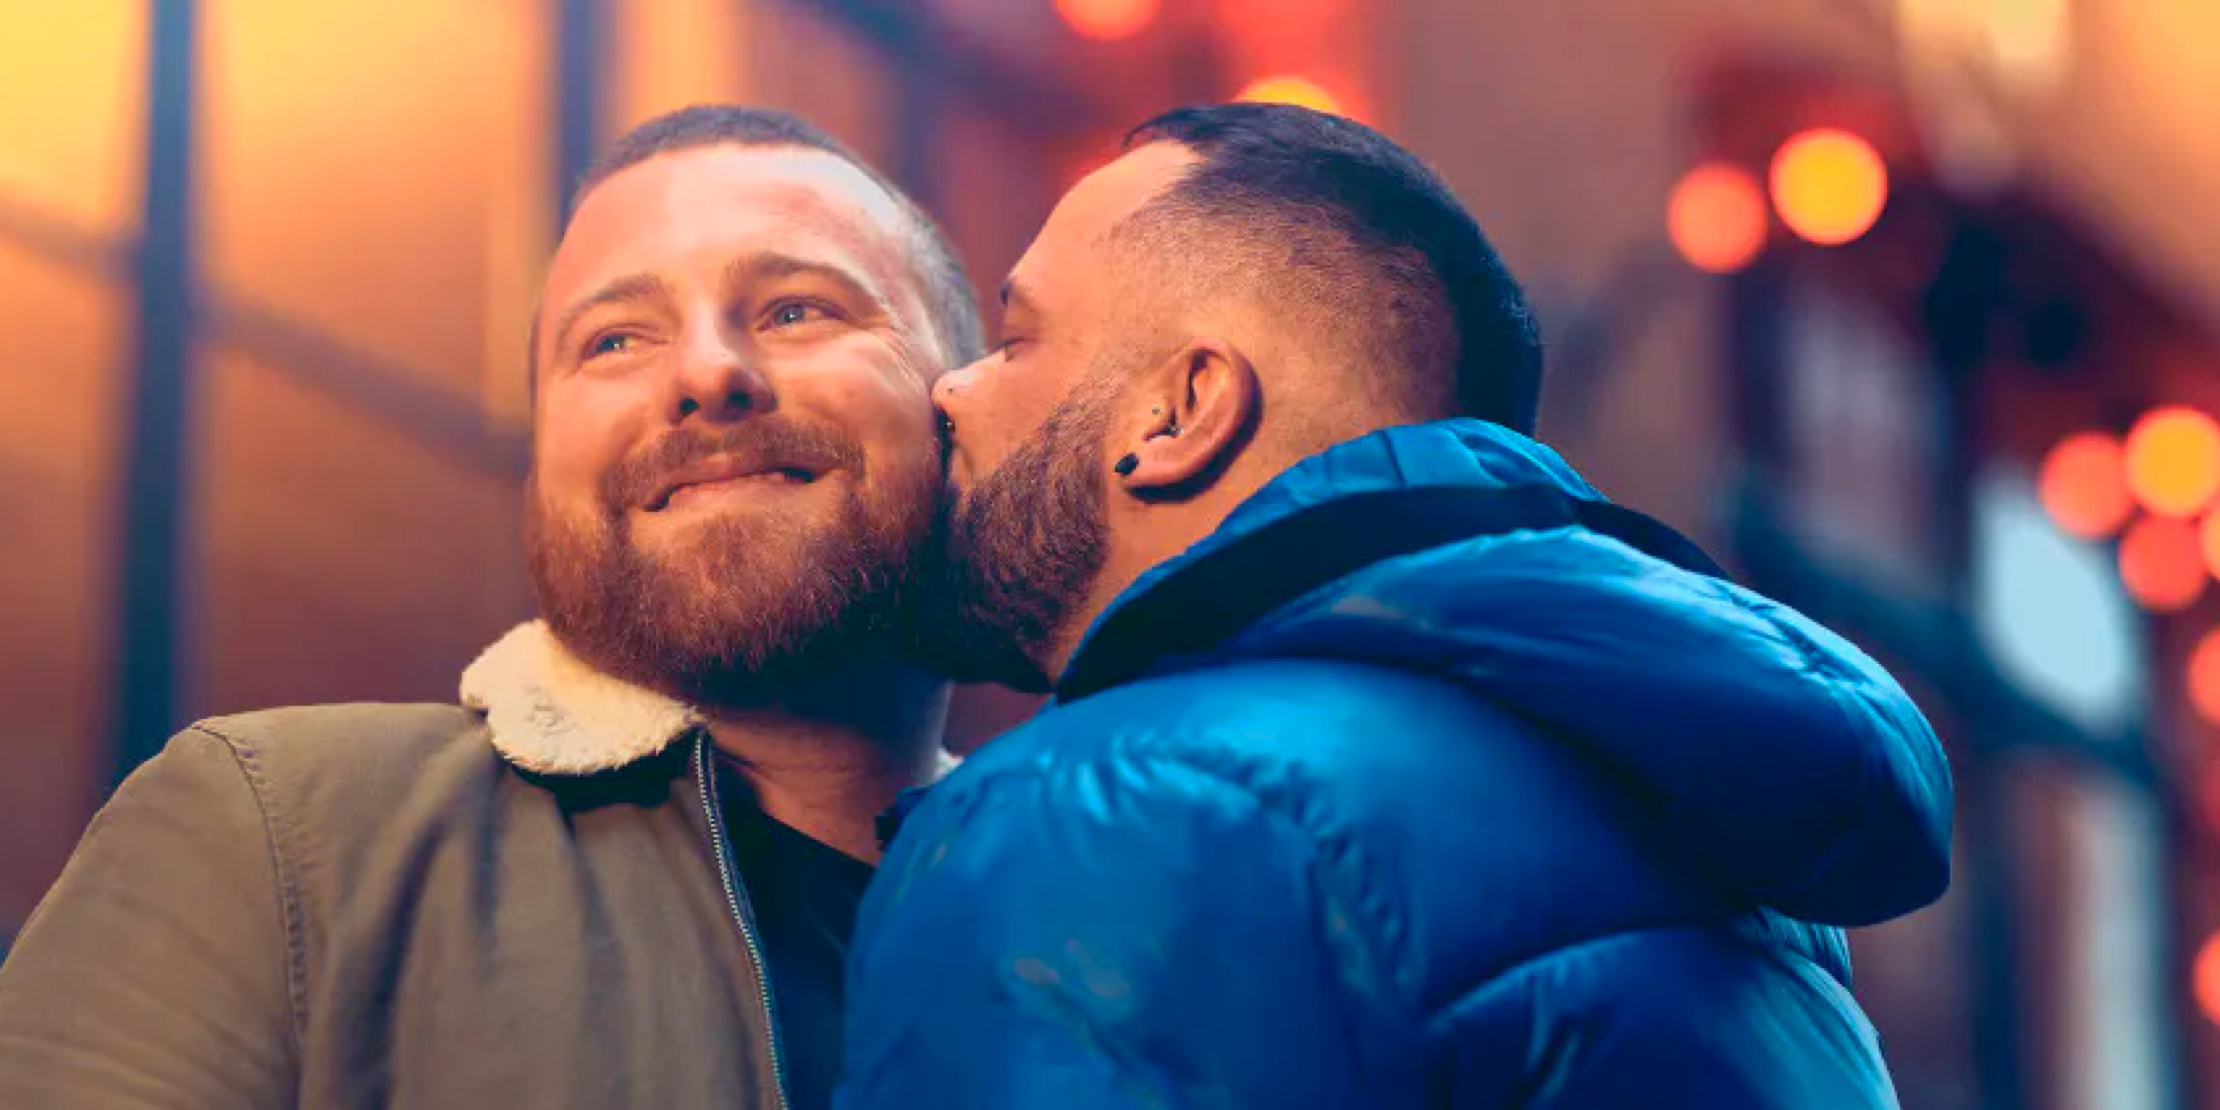 A man smiling as another man kisses his cheek